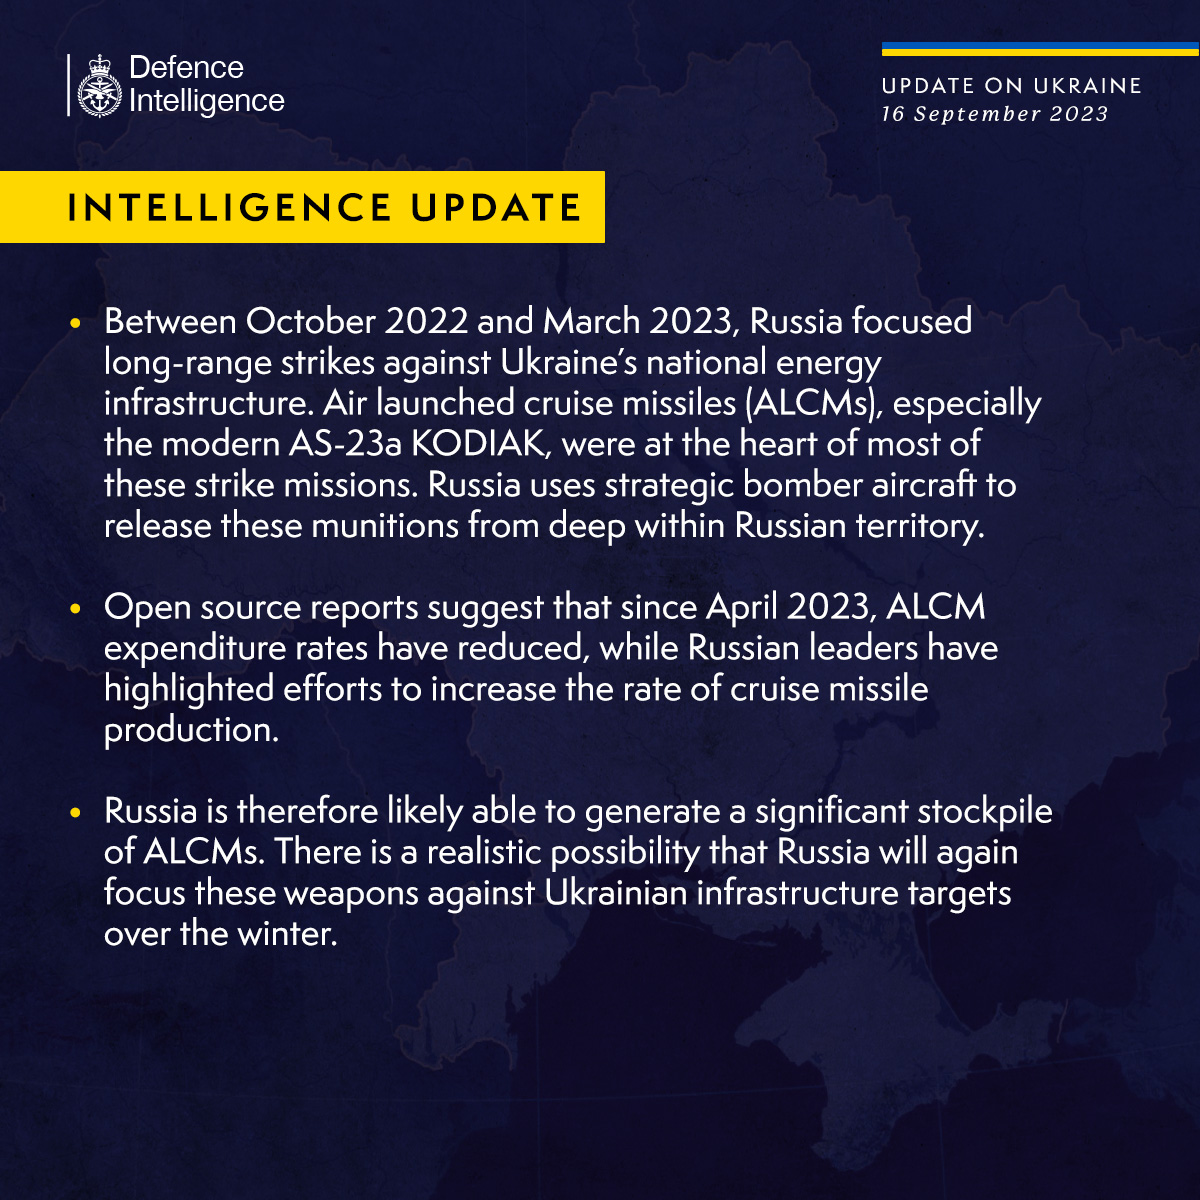 Latest Defence Intelligence update on the situation in Ukraine - 16 September 2023